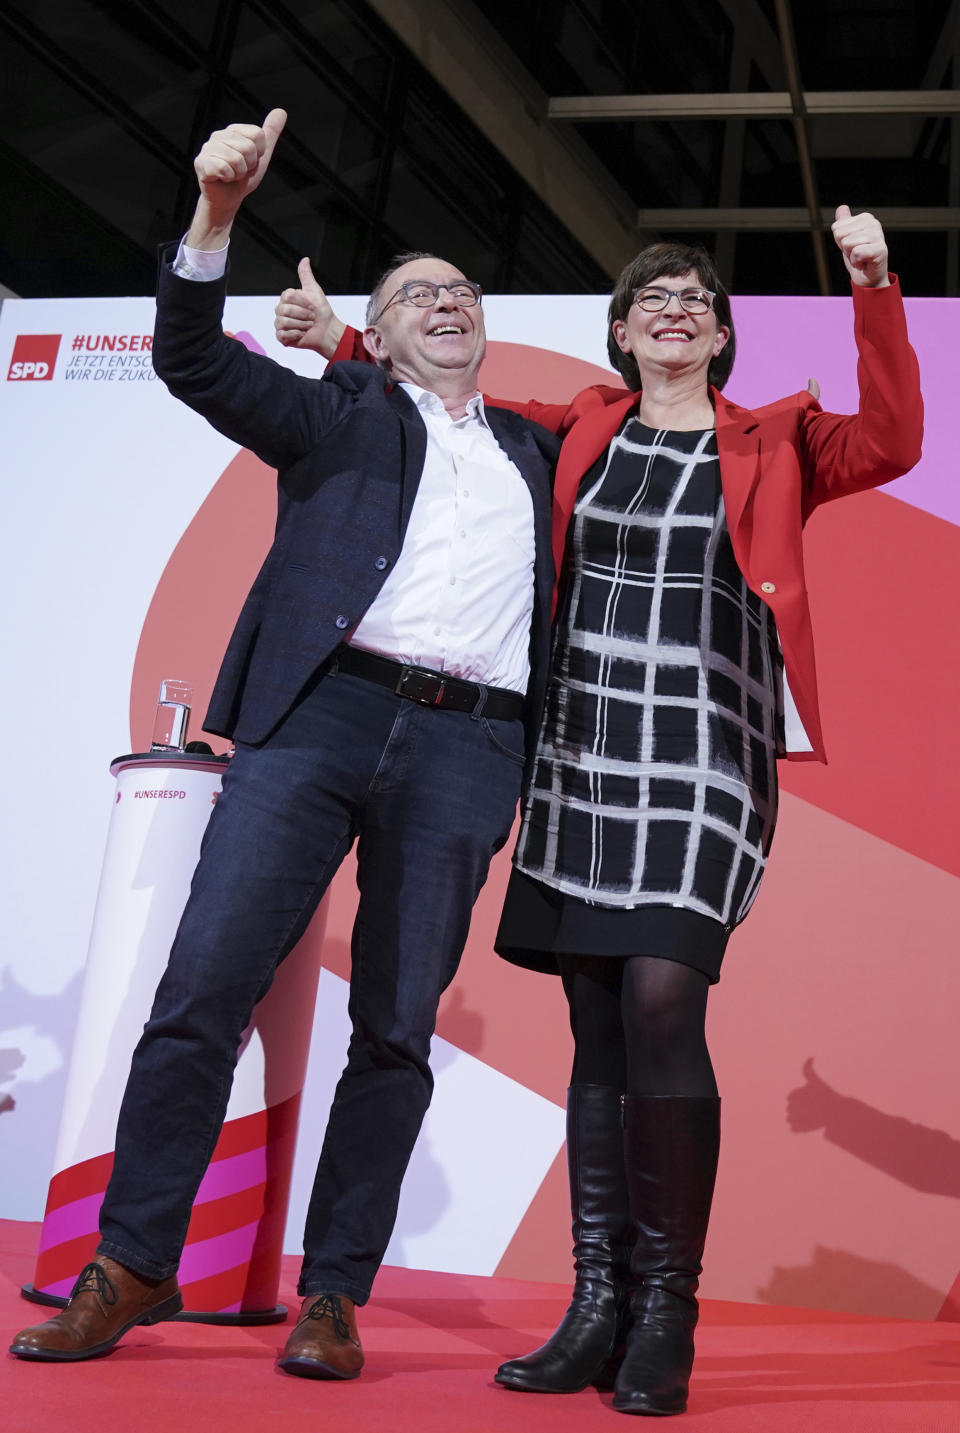 Norbert Walter-Borjans and Saskia Esken wave after the announcement of the result of the vote on the SPD chairmanship in the Willy Brandt House in Berlin, Germany, Saturday, Nov. 30, 2019. Walter-Borjans and Esken have won the vote. The new leadership will be confirmed at the party conference on December 6. (Kay Nietfeld/dpa via AP)